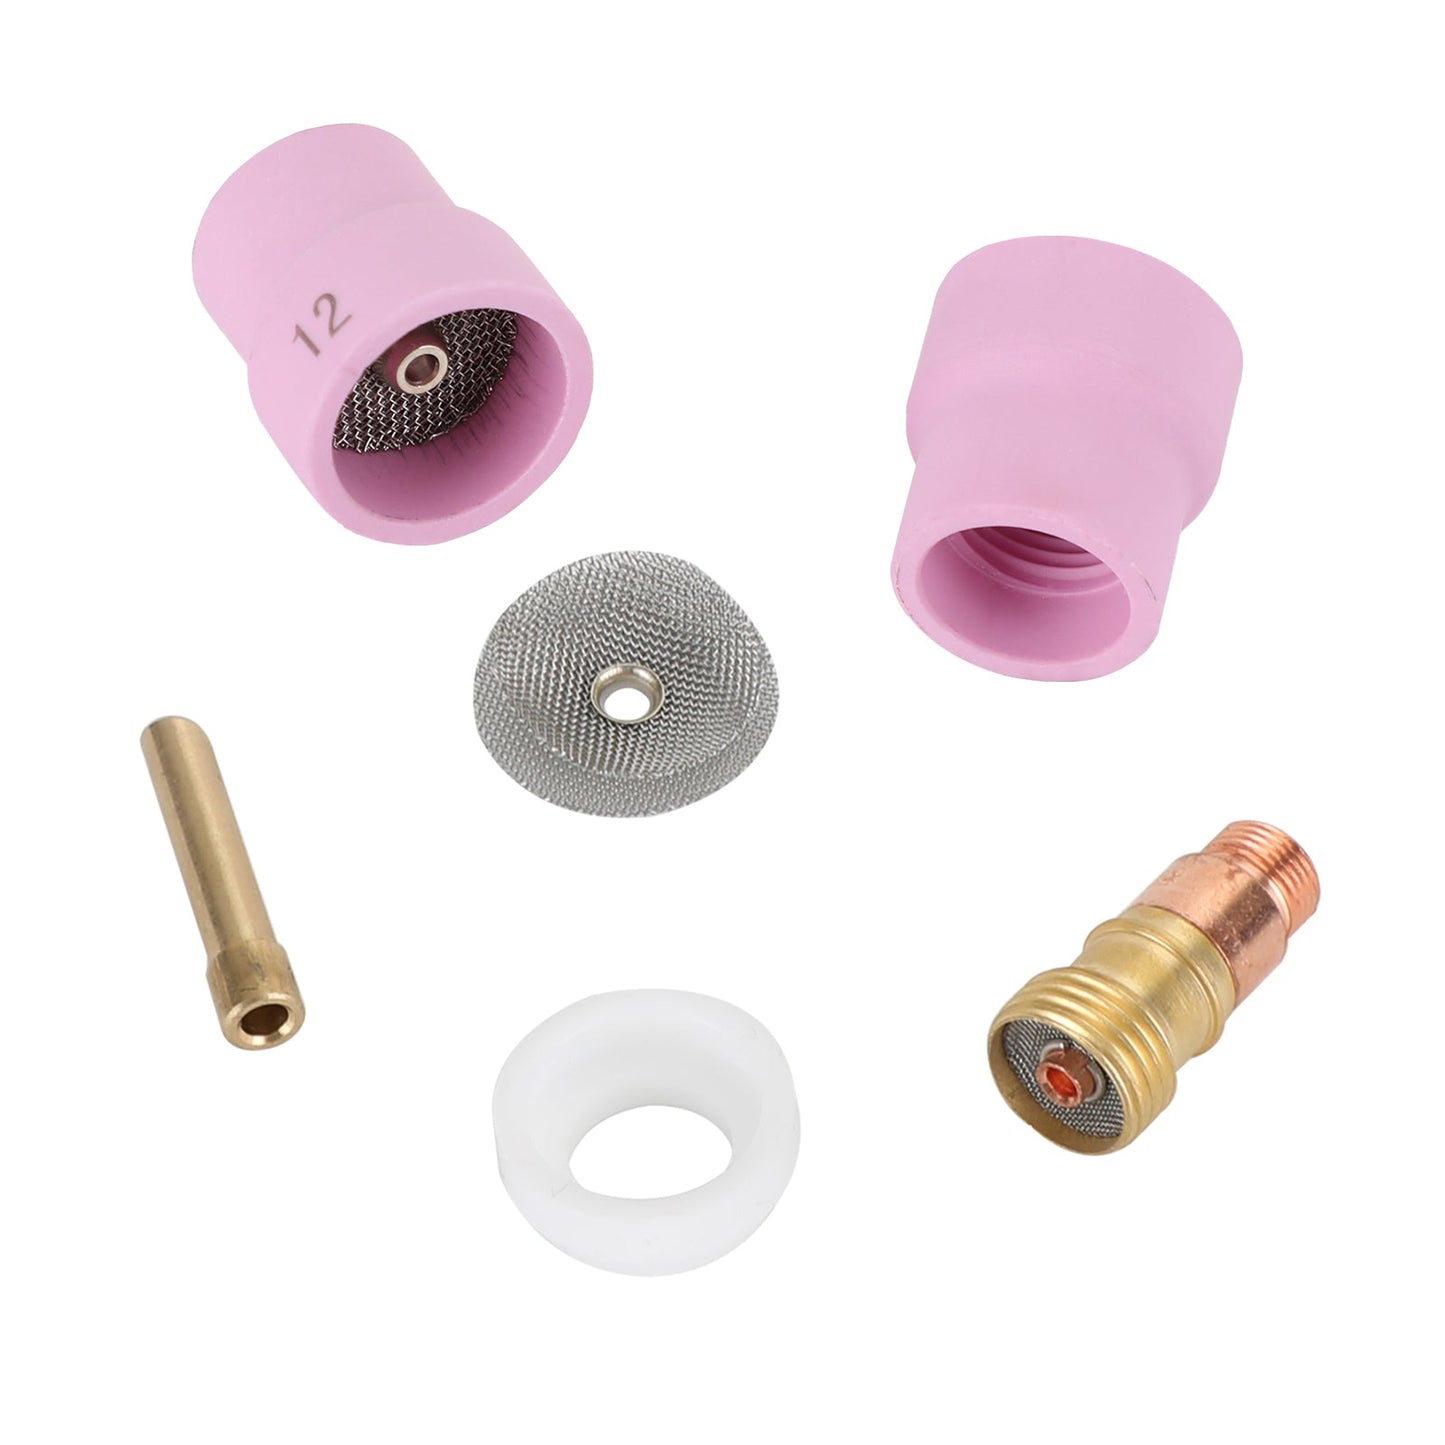 #12 Ceramic Glass Cup Complete Kit For Wp-17 18 & 26 Series Tig Torches